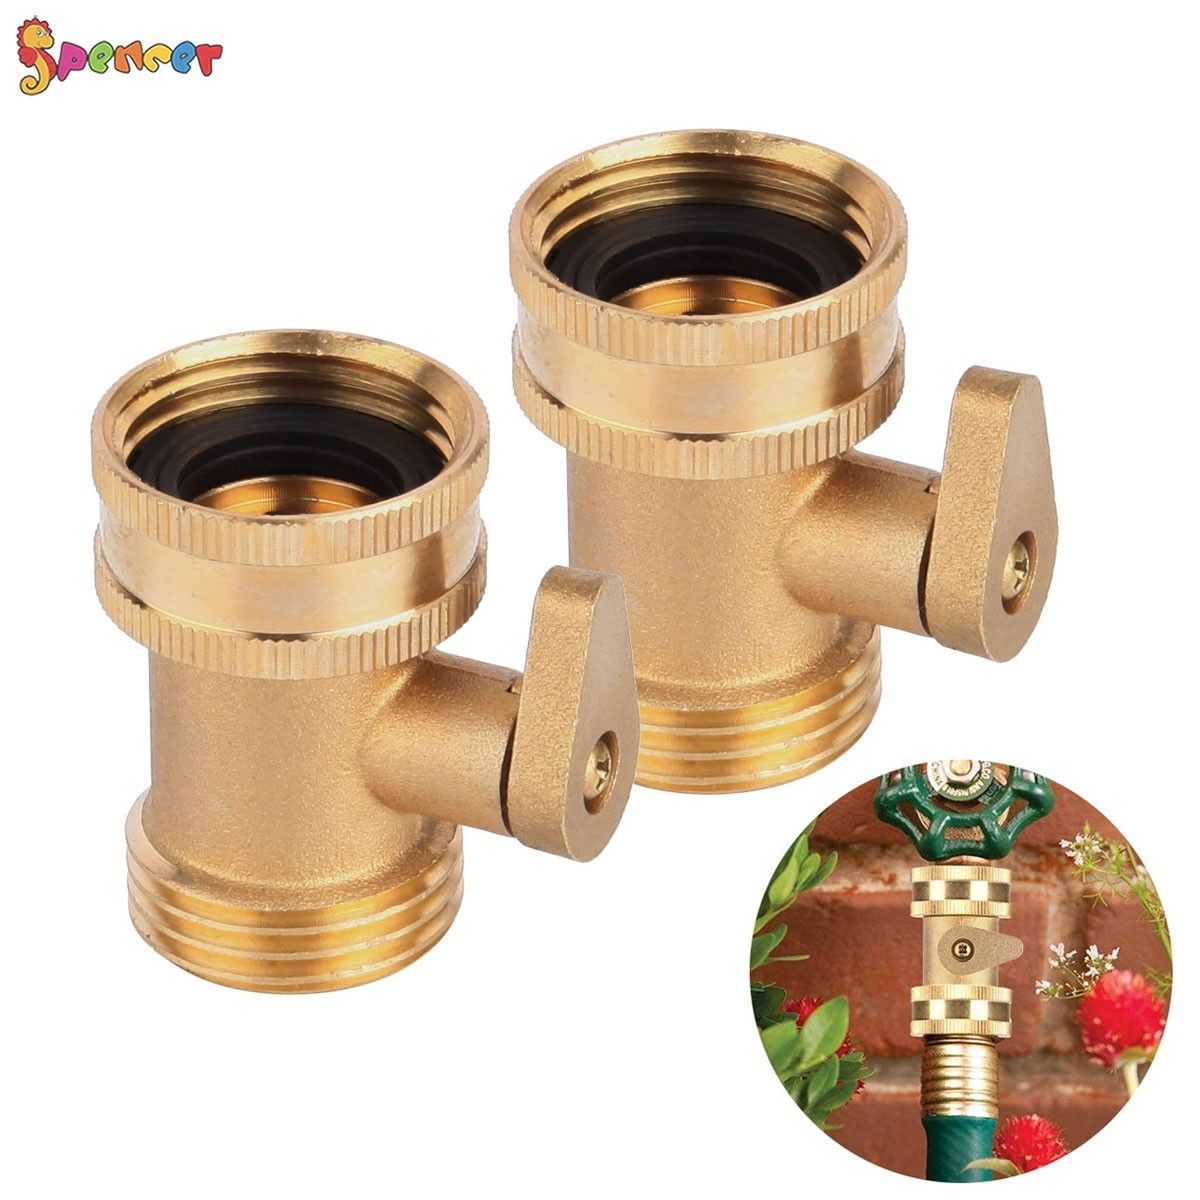 Hose Connector Shut-off Valve Water Faucet Joint Adapter For Garden Yard 